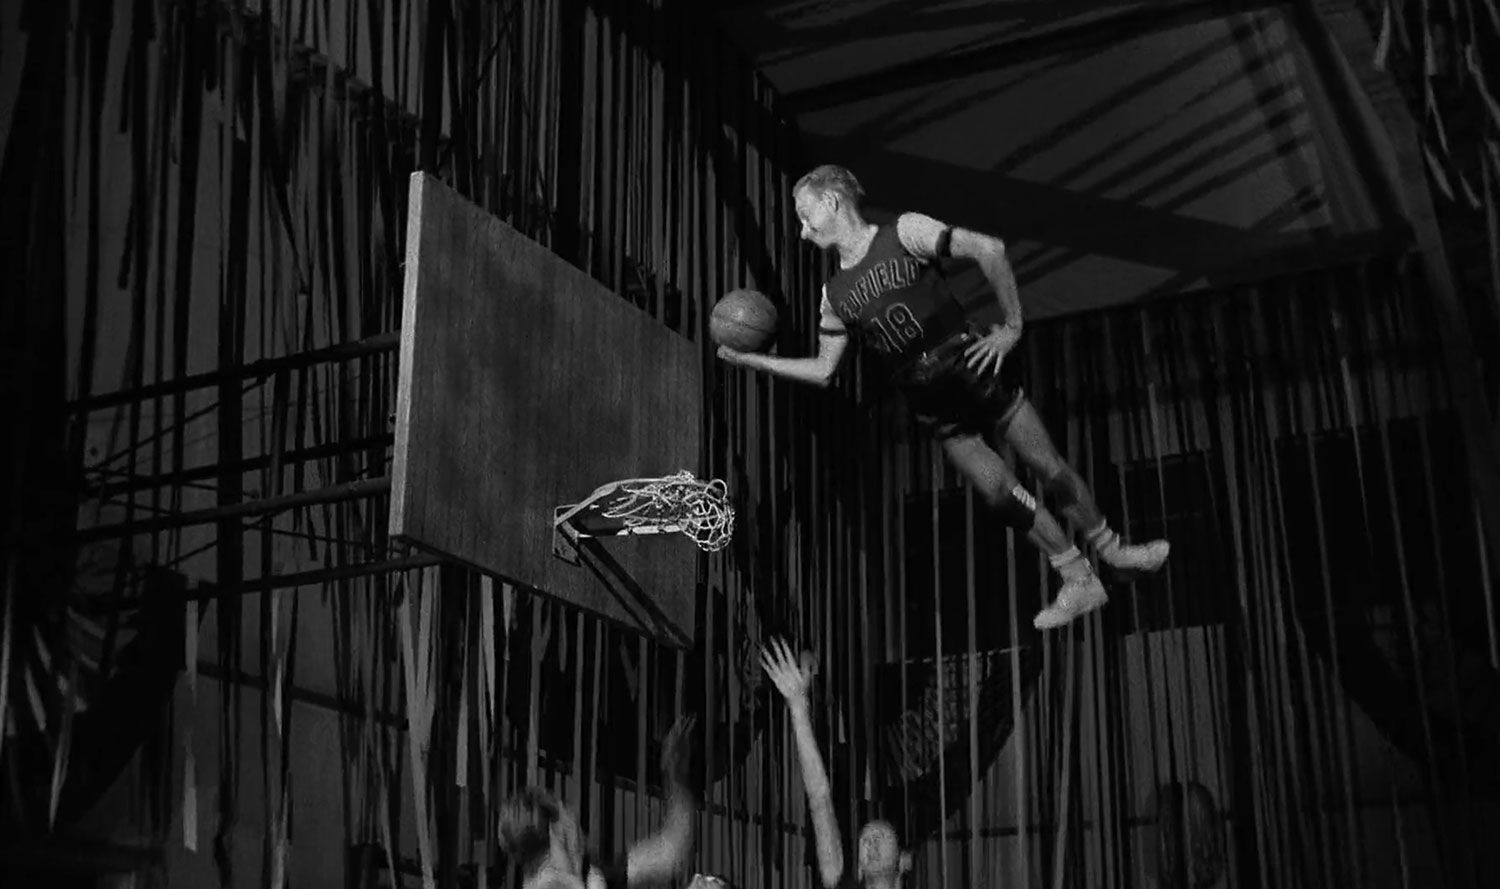 A man plays gravity-defying basketball in The Absent Minded Professor